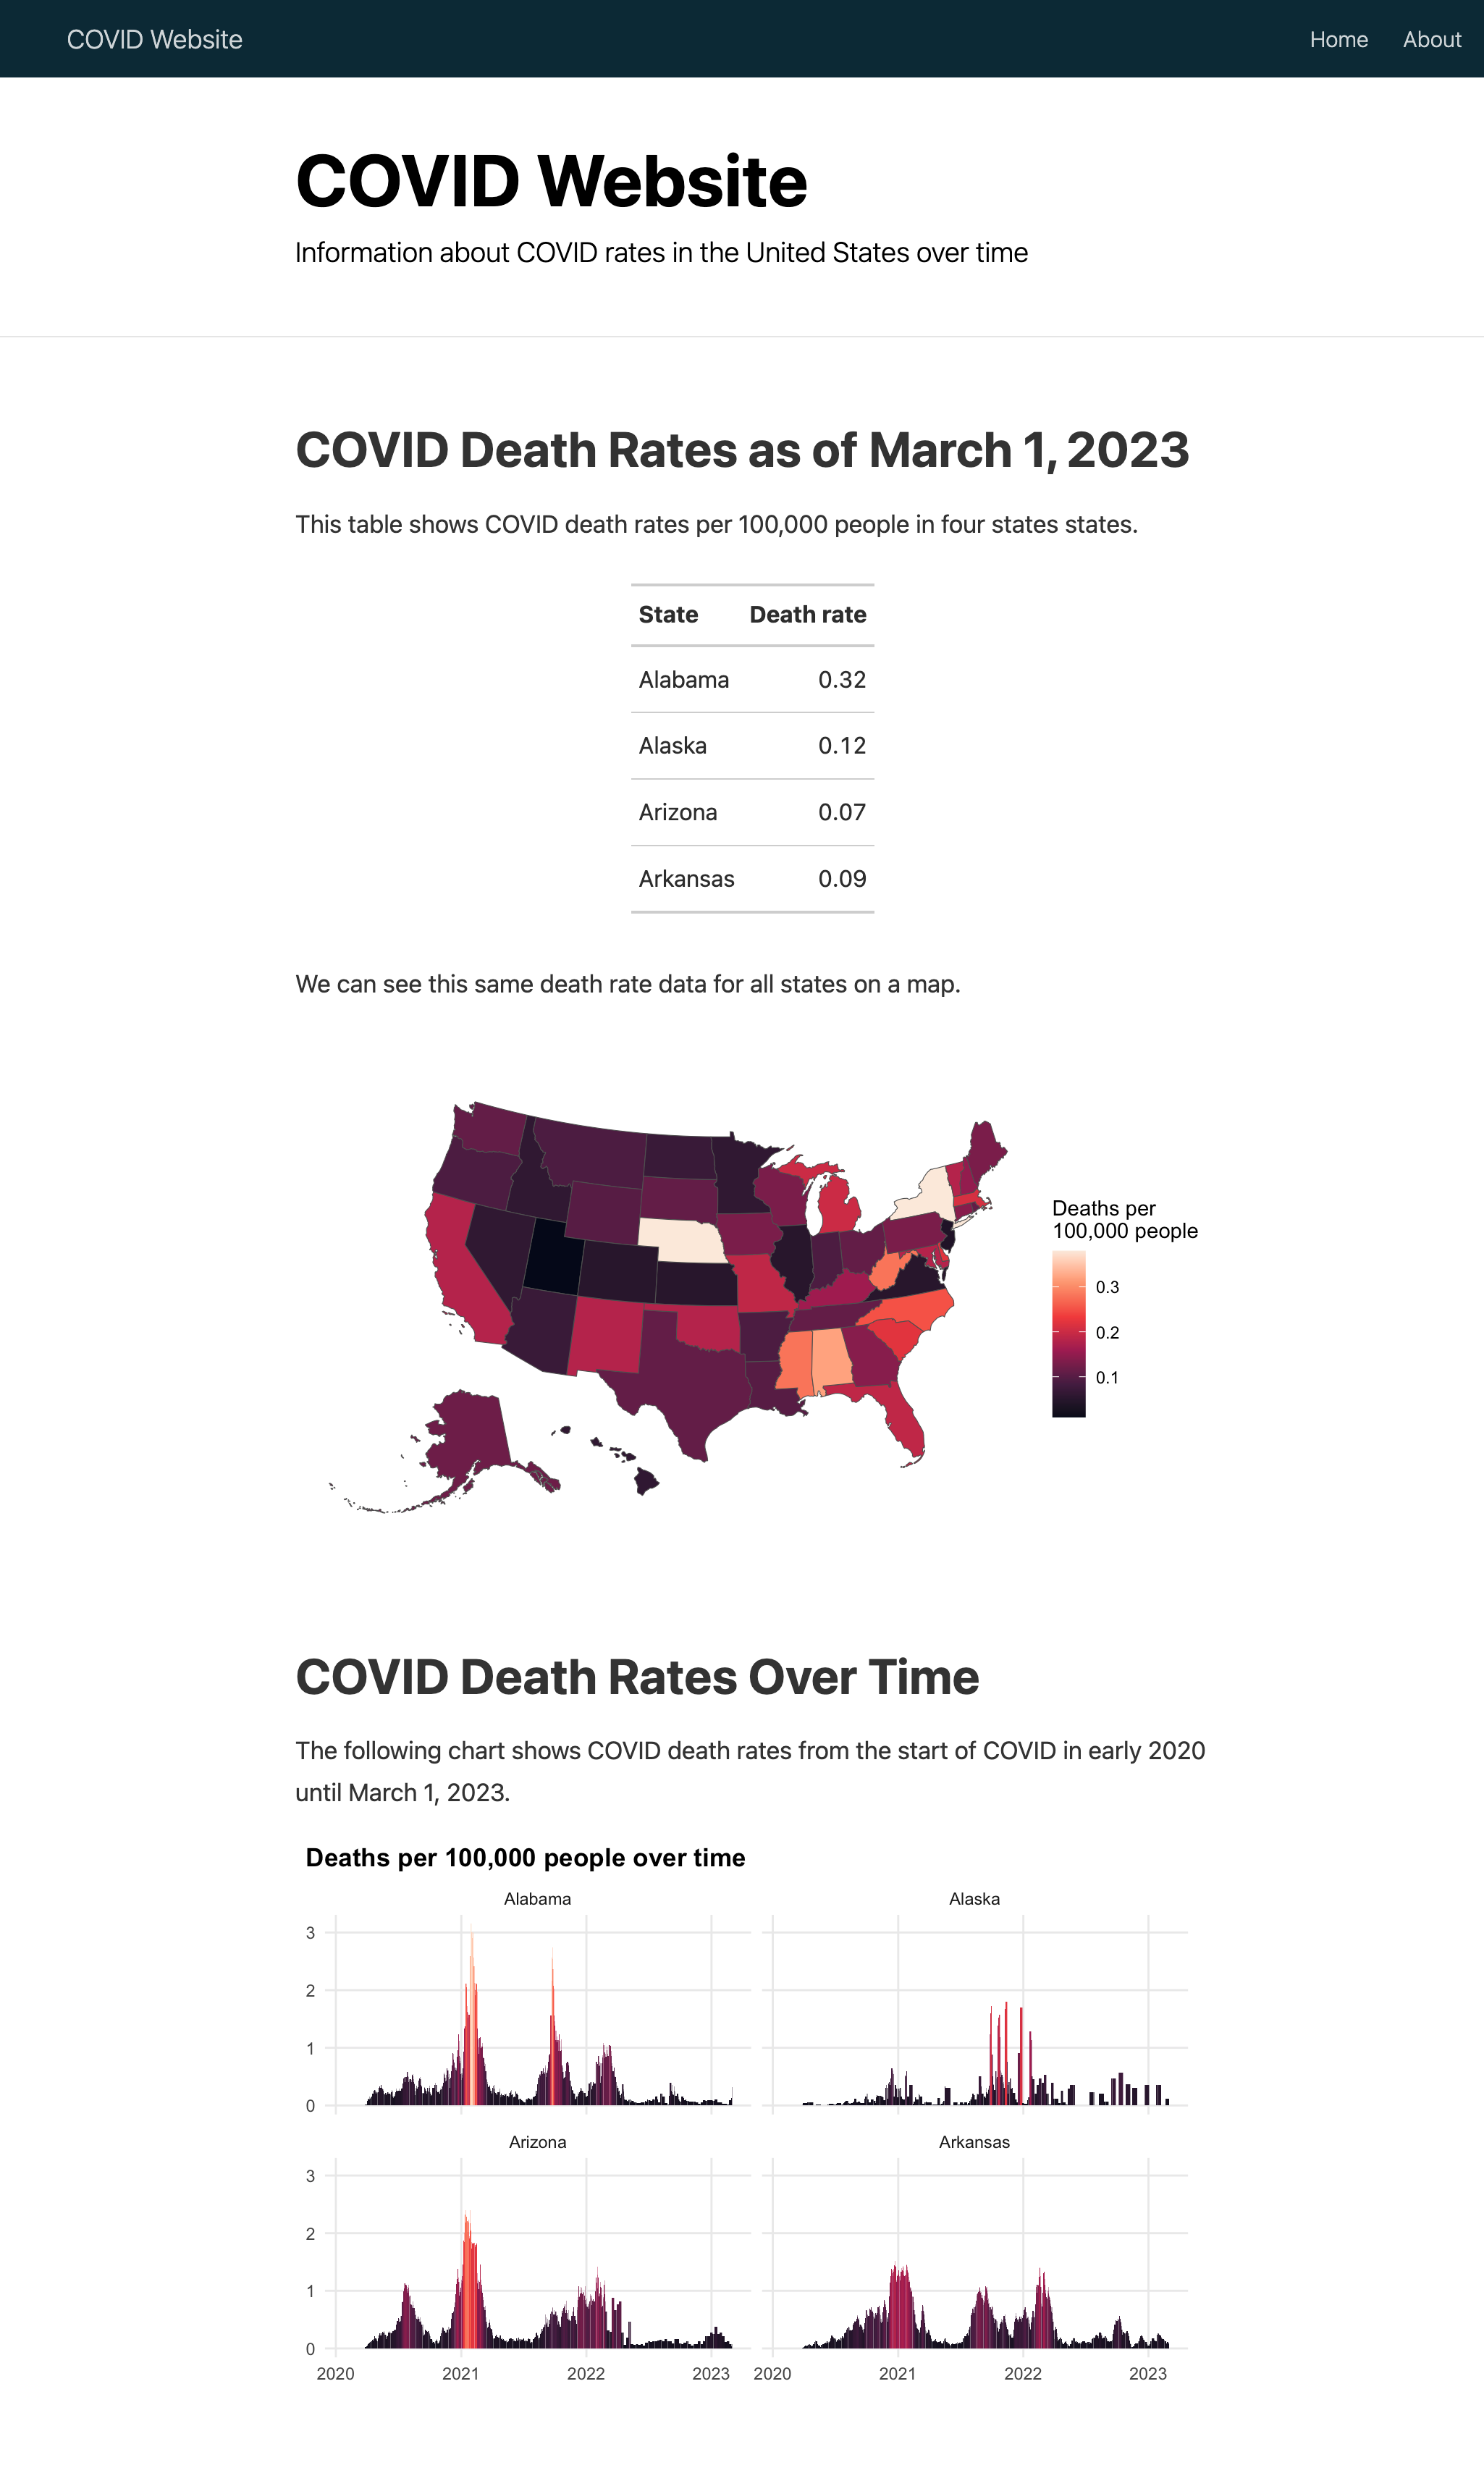 The COVID website with a table, map, and chart